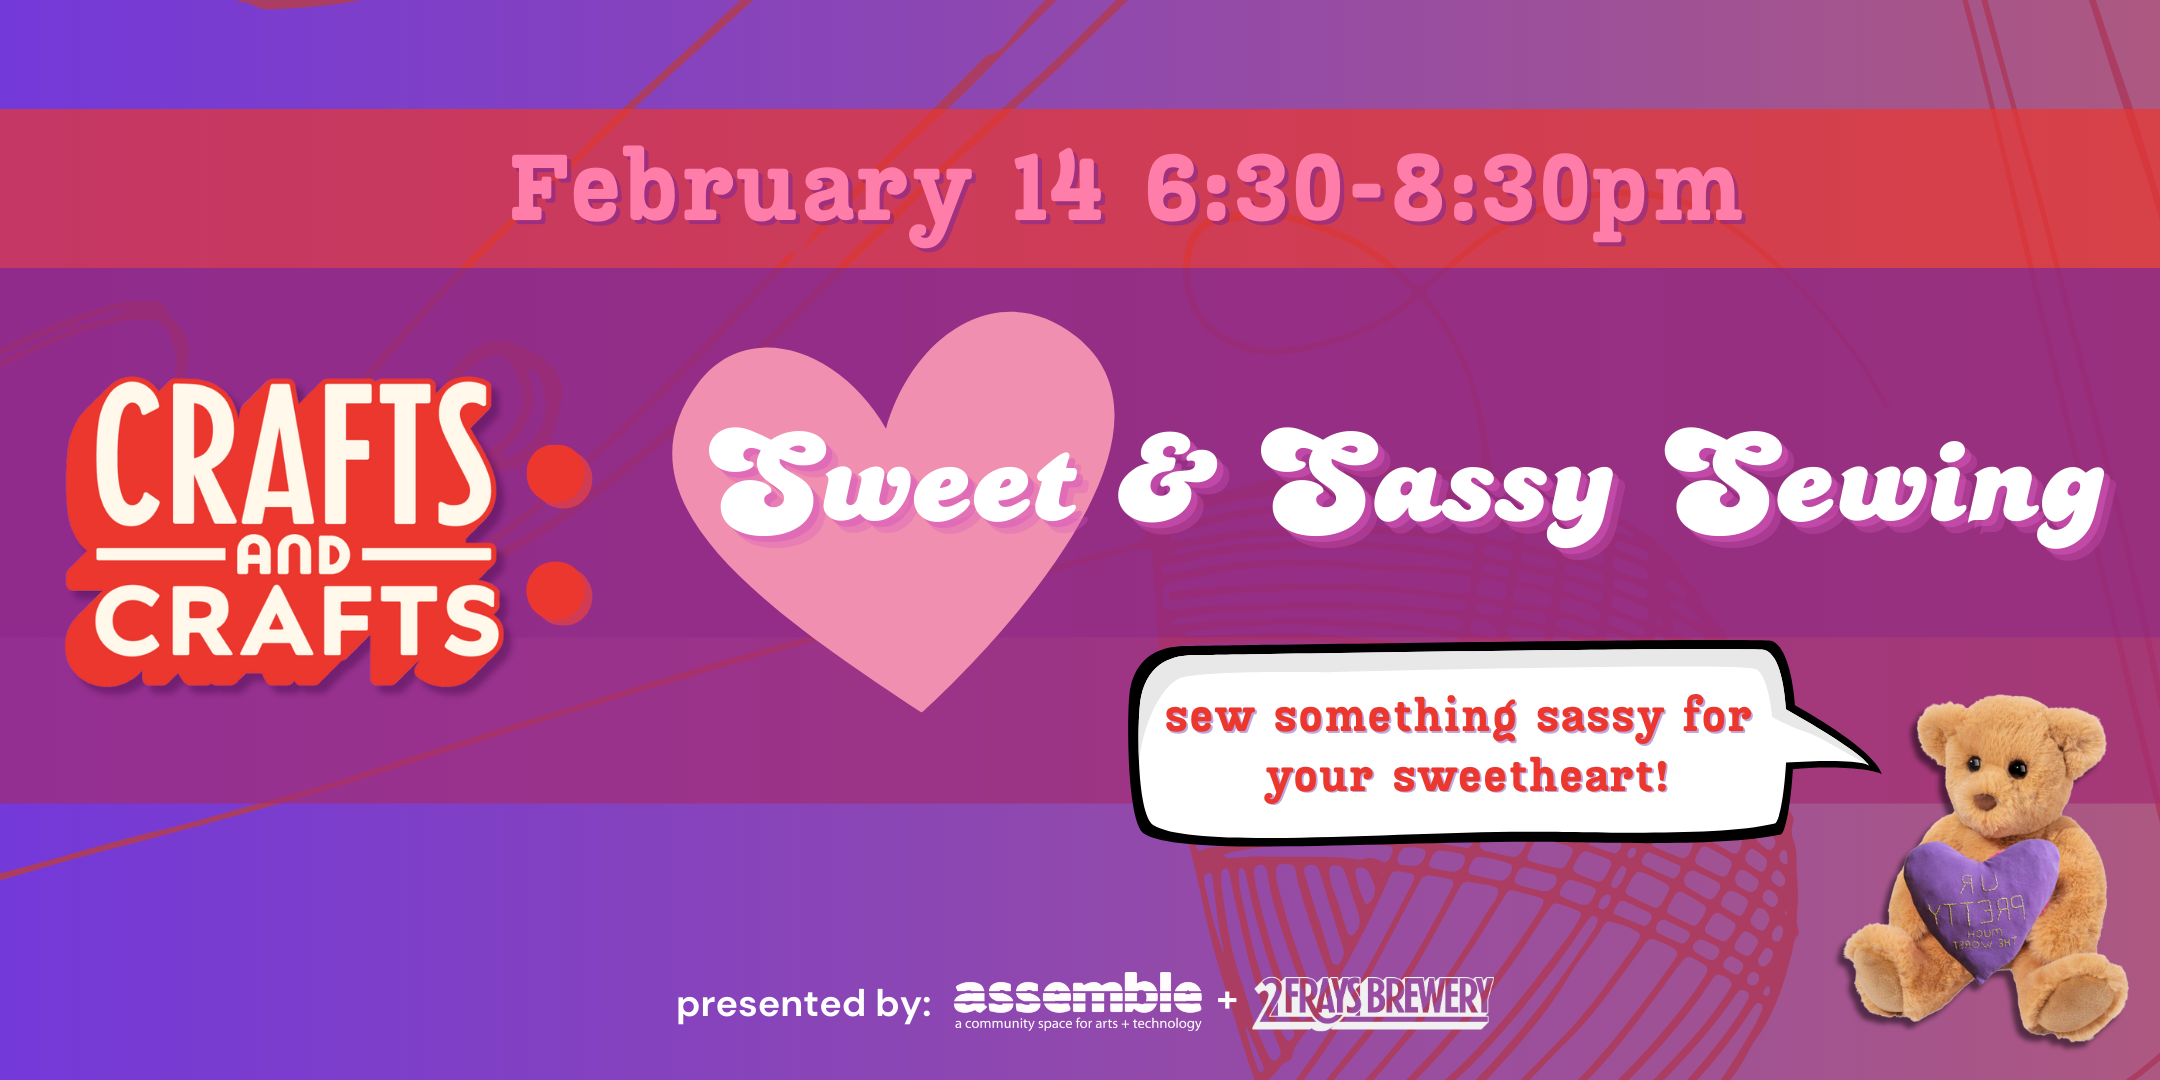 crafts and crafts: sweet and sassy sewing february 14 6:30-8:30pm